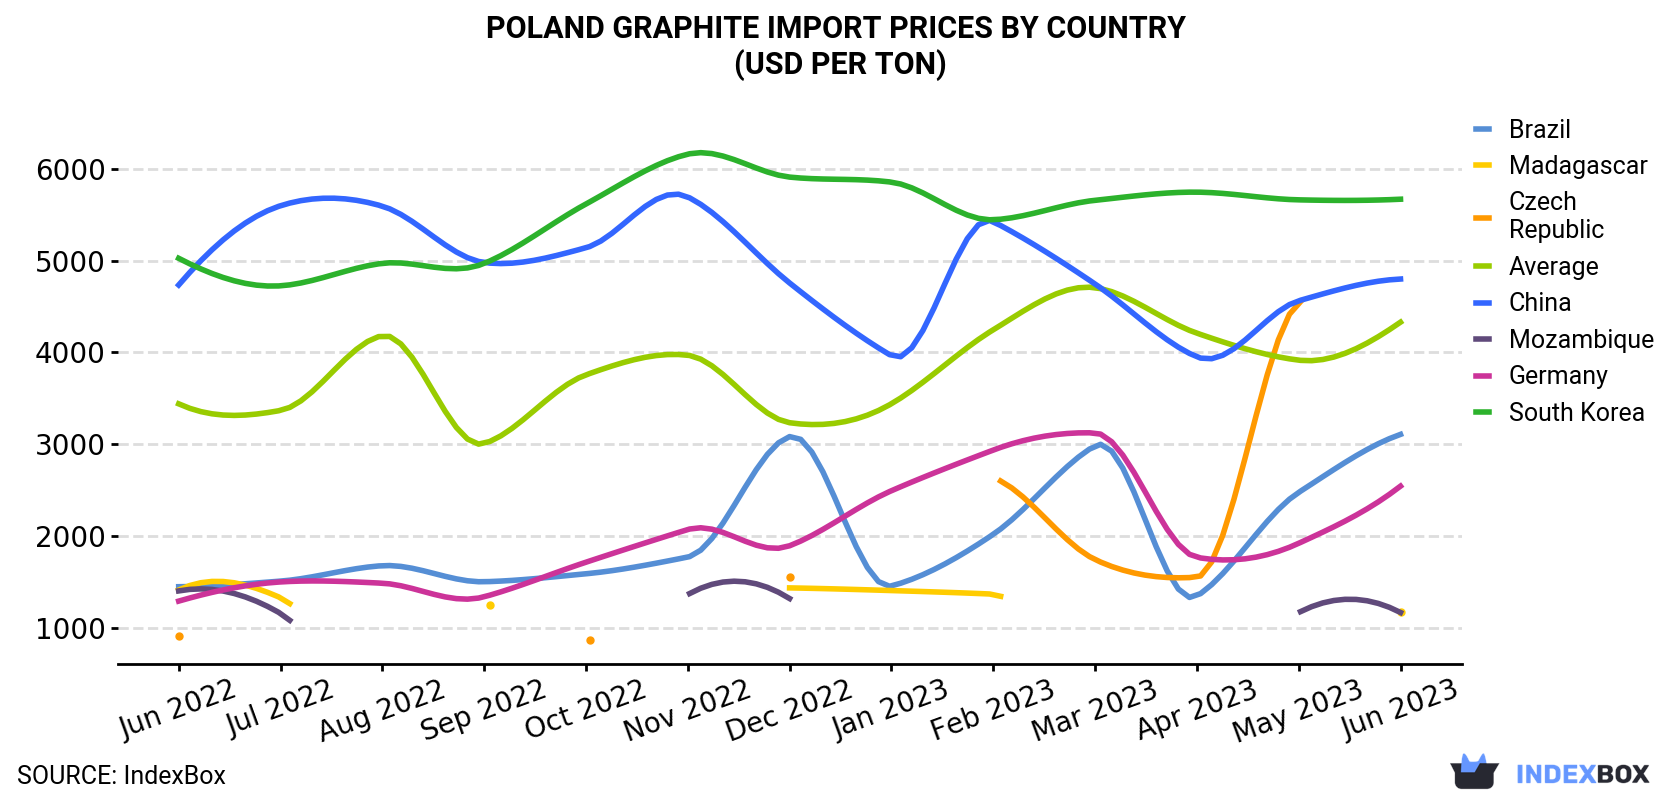 Poland Graphite Import Prices By Country (USD Per Ton)